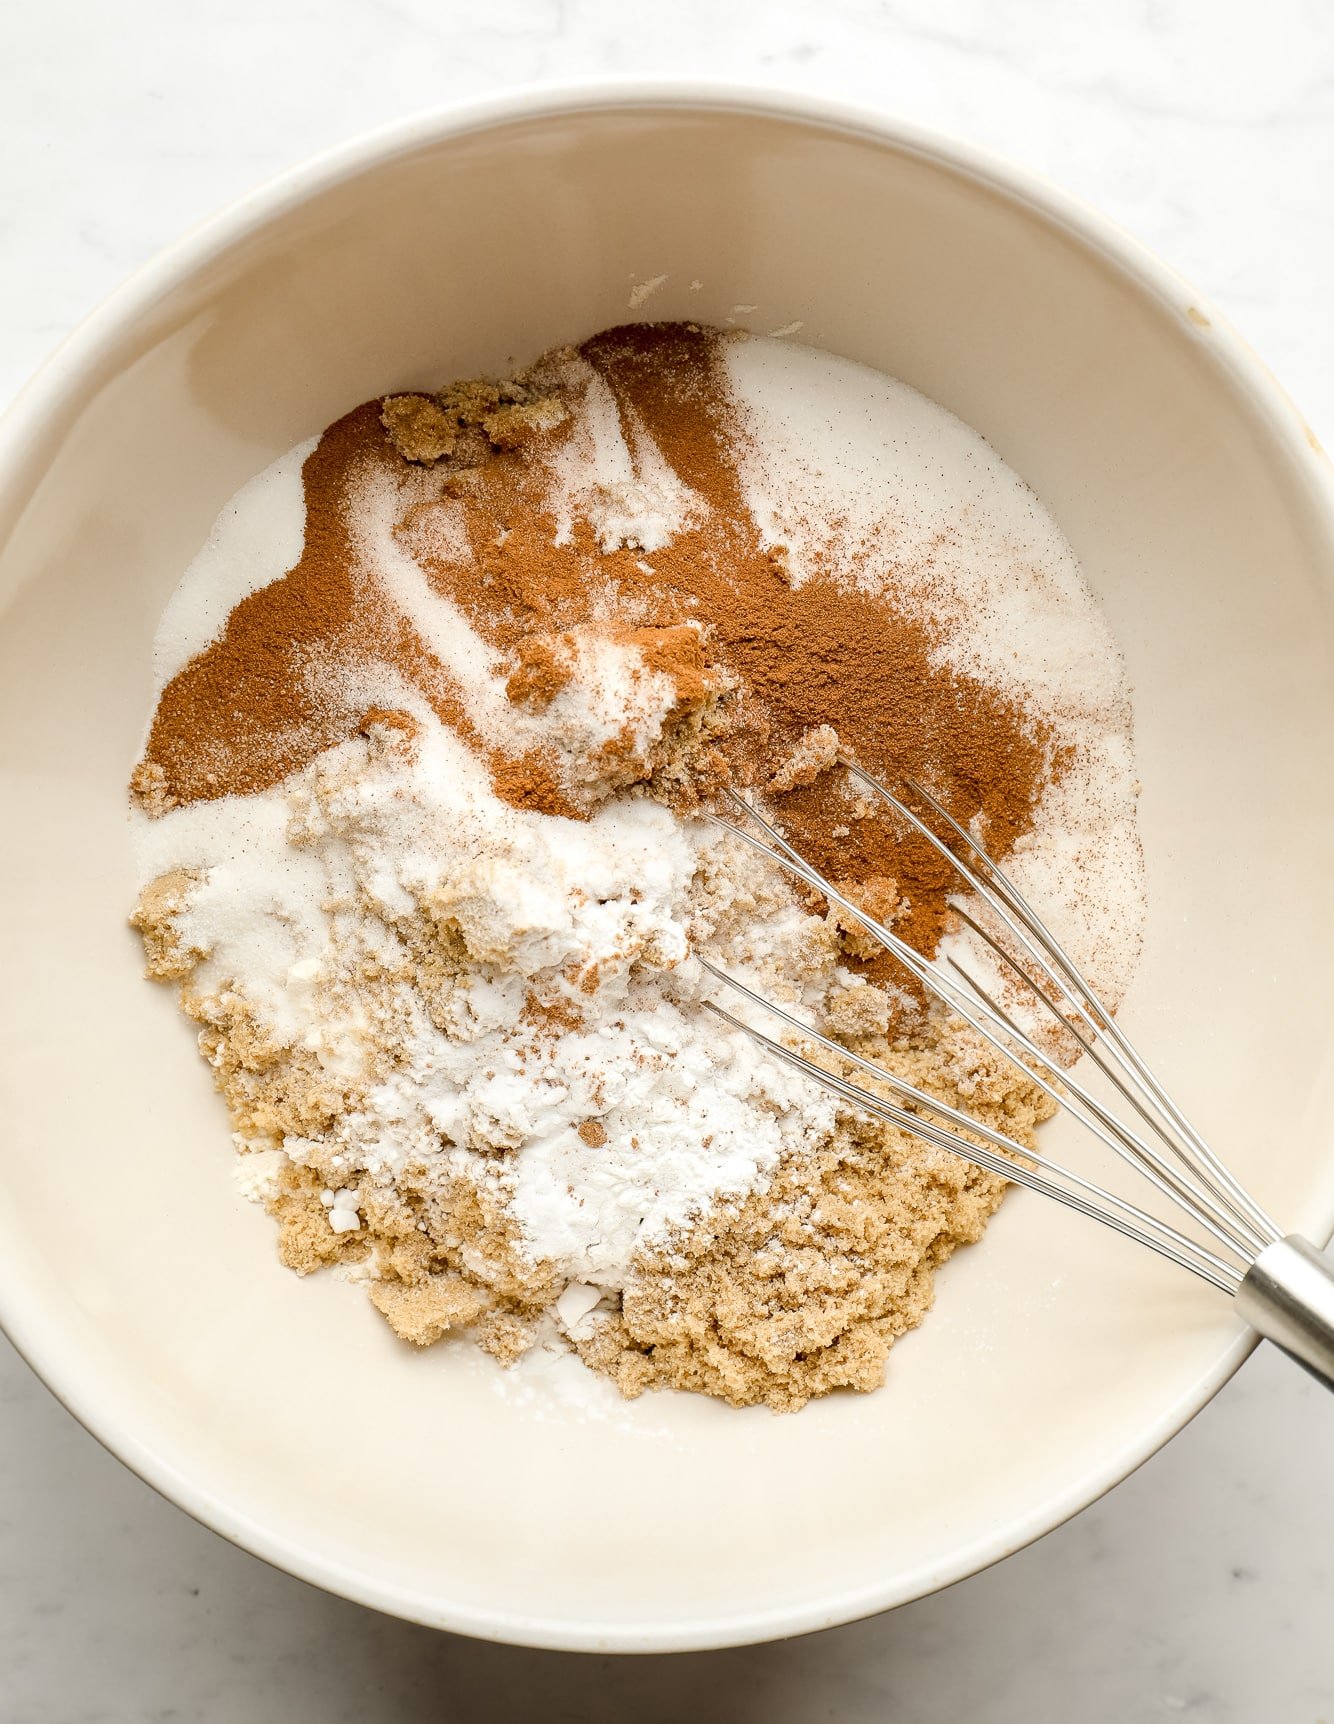 whisking flour, sugar, and spices together in a large white bowl.